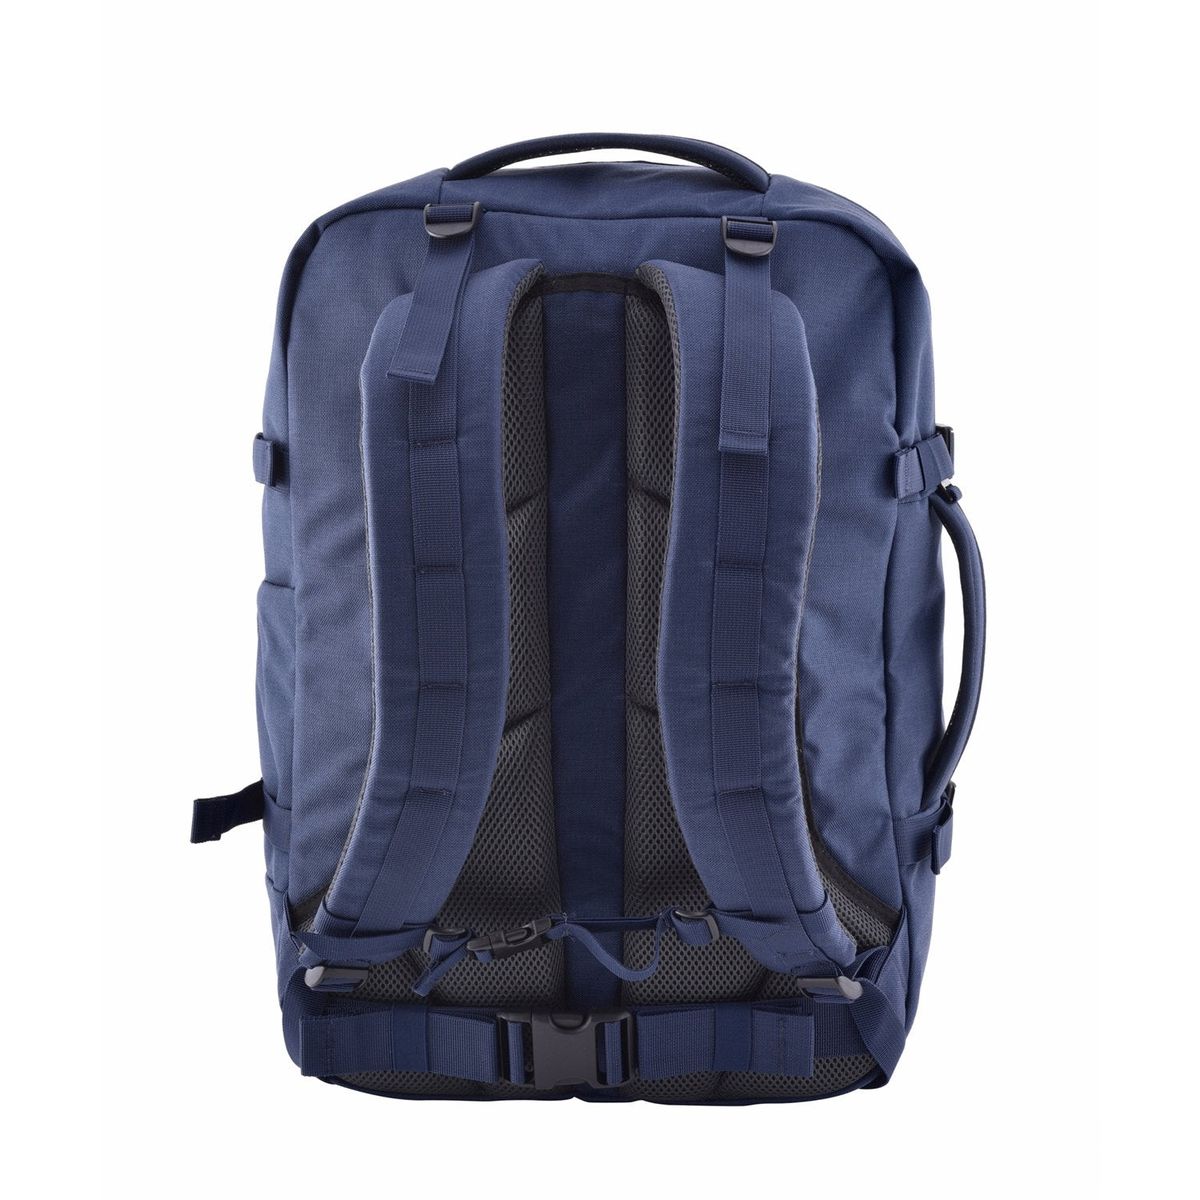 CainZero Military Backpack 44L -  Navy